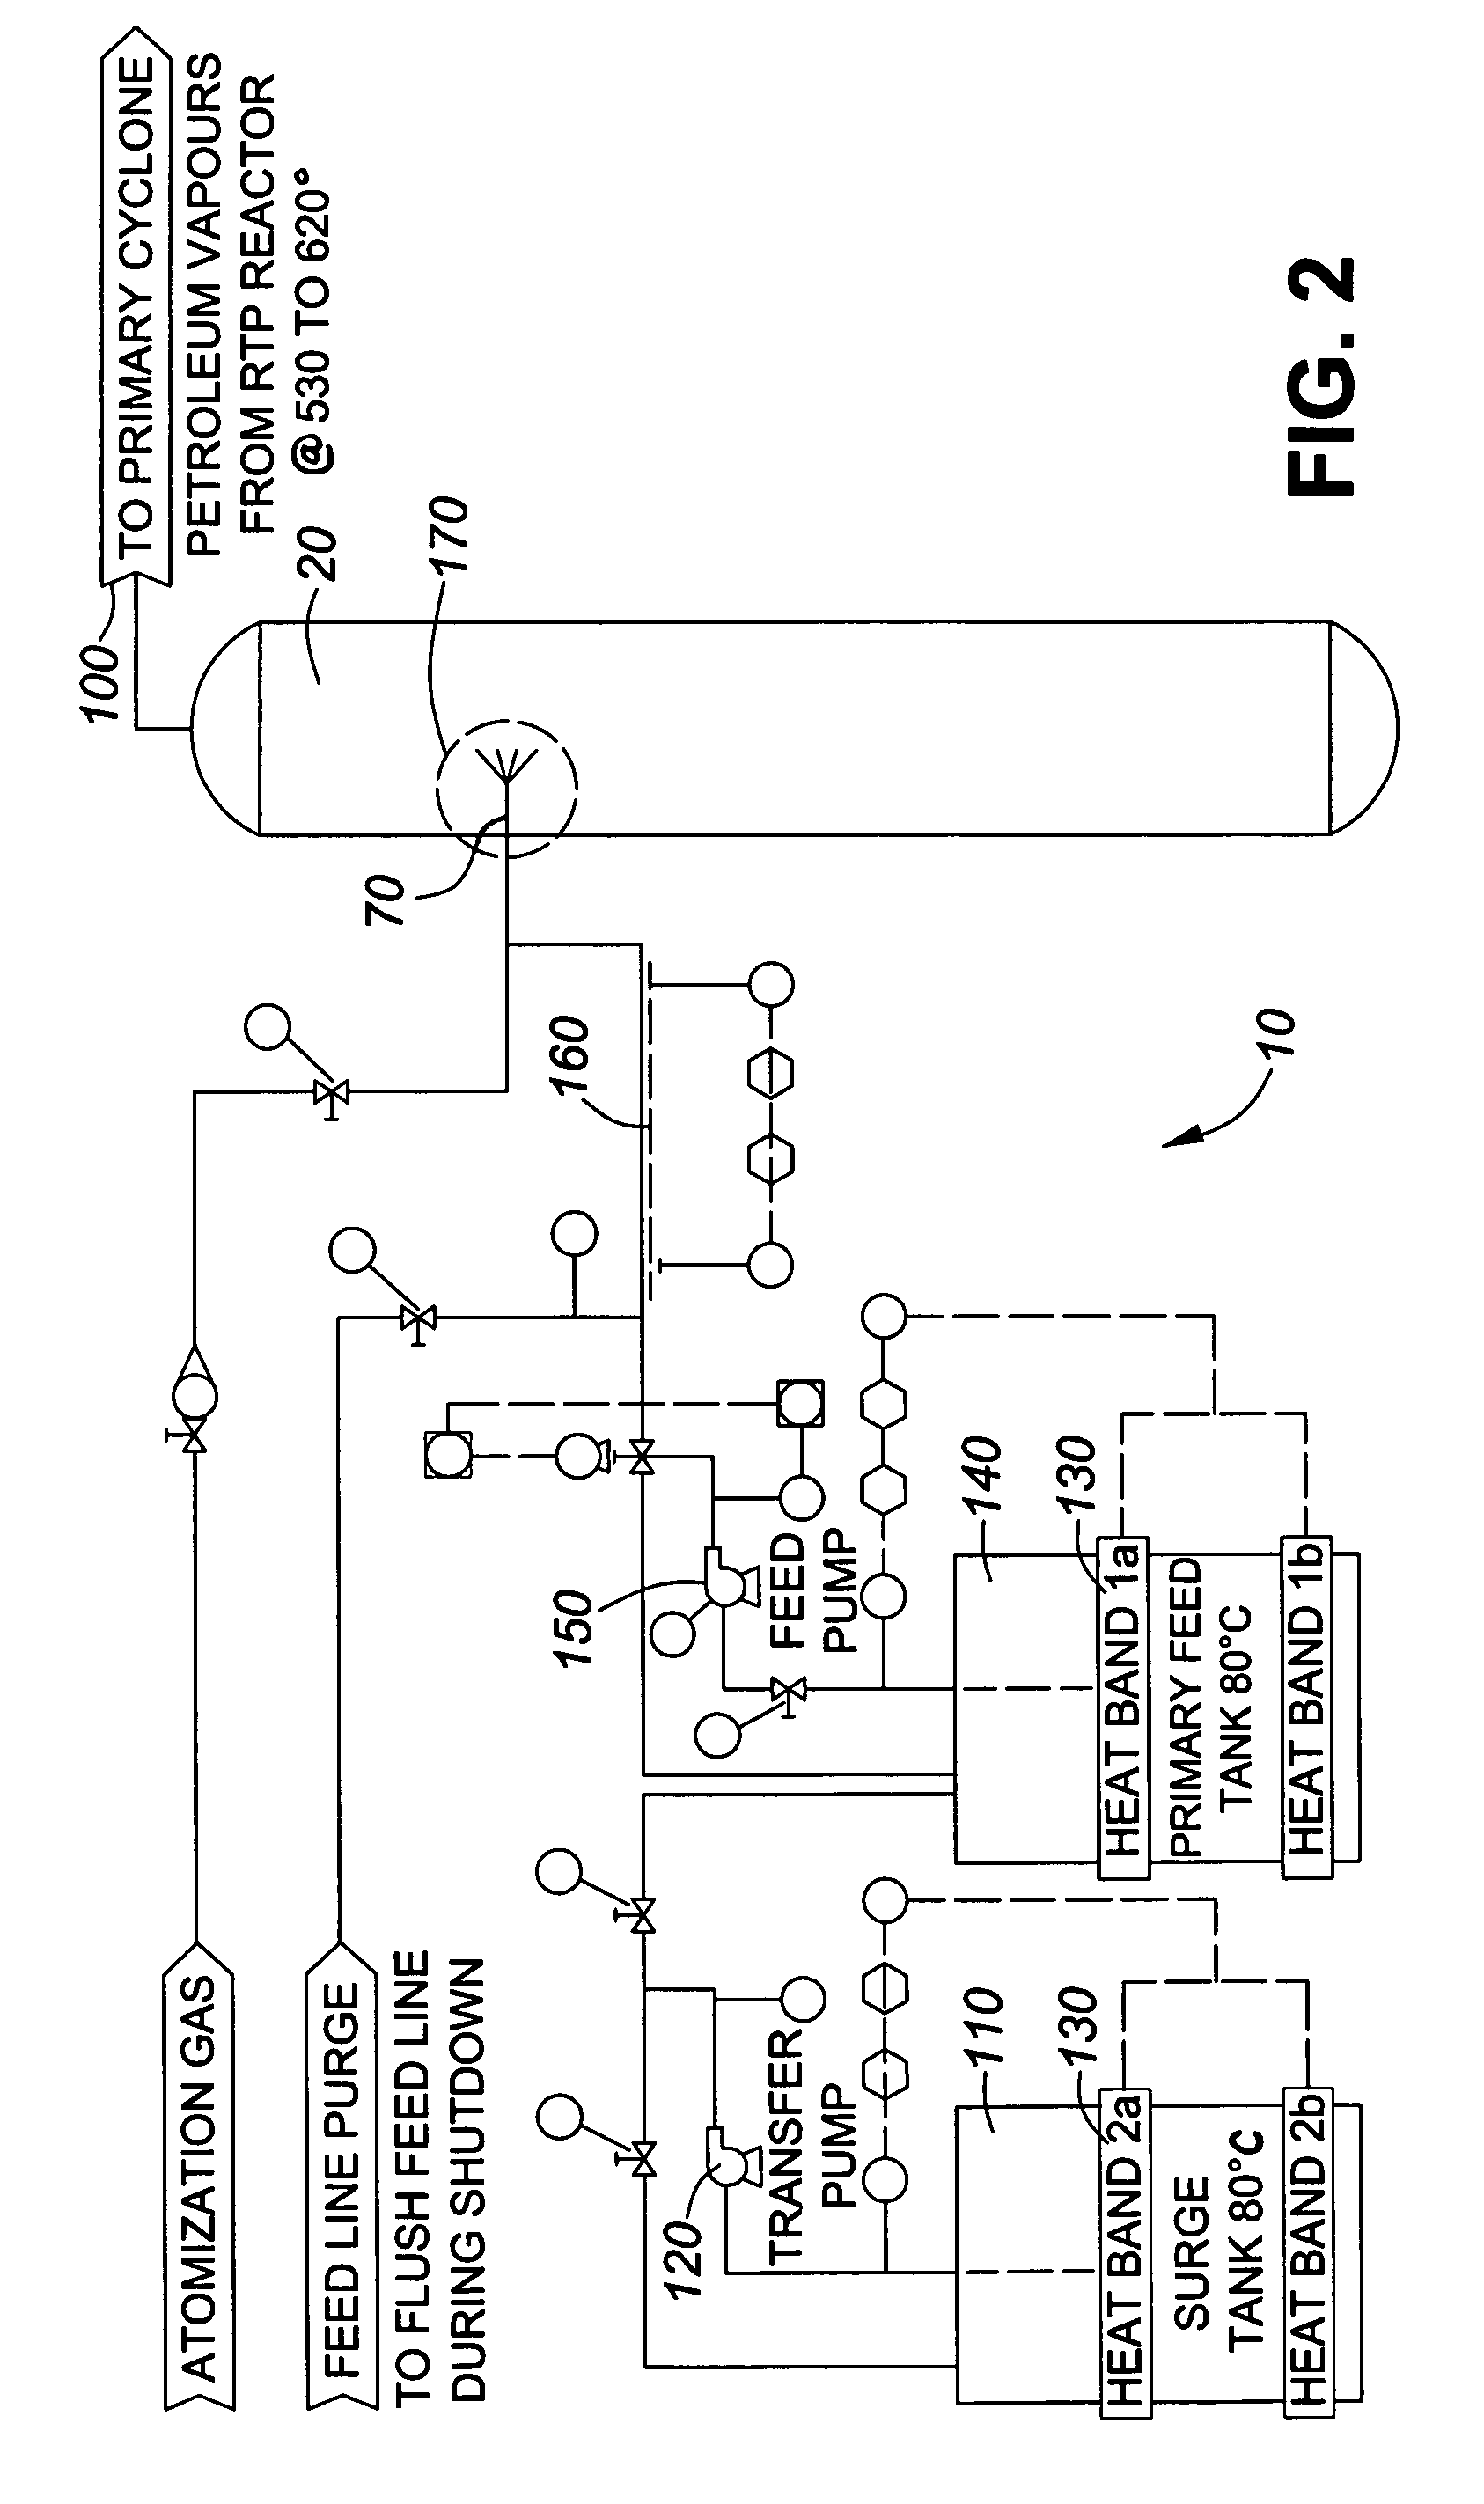 Modified thermal processing of heavy hydrocarbon feedstocks